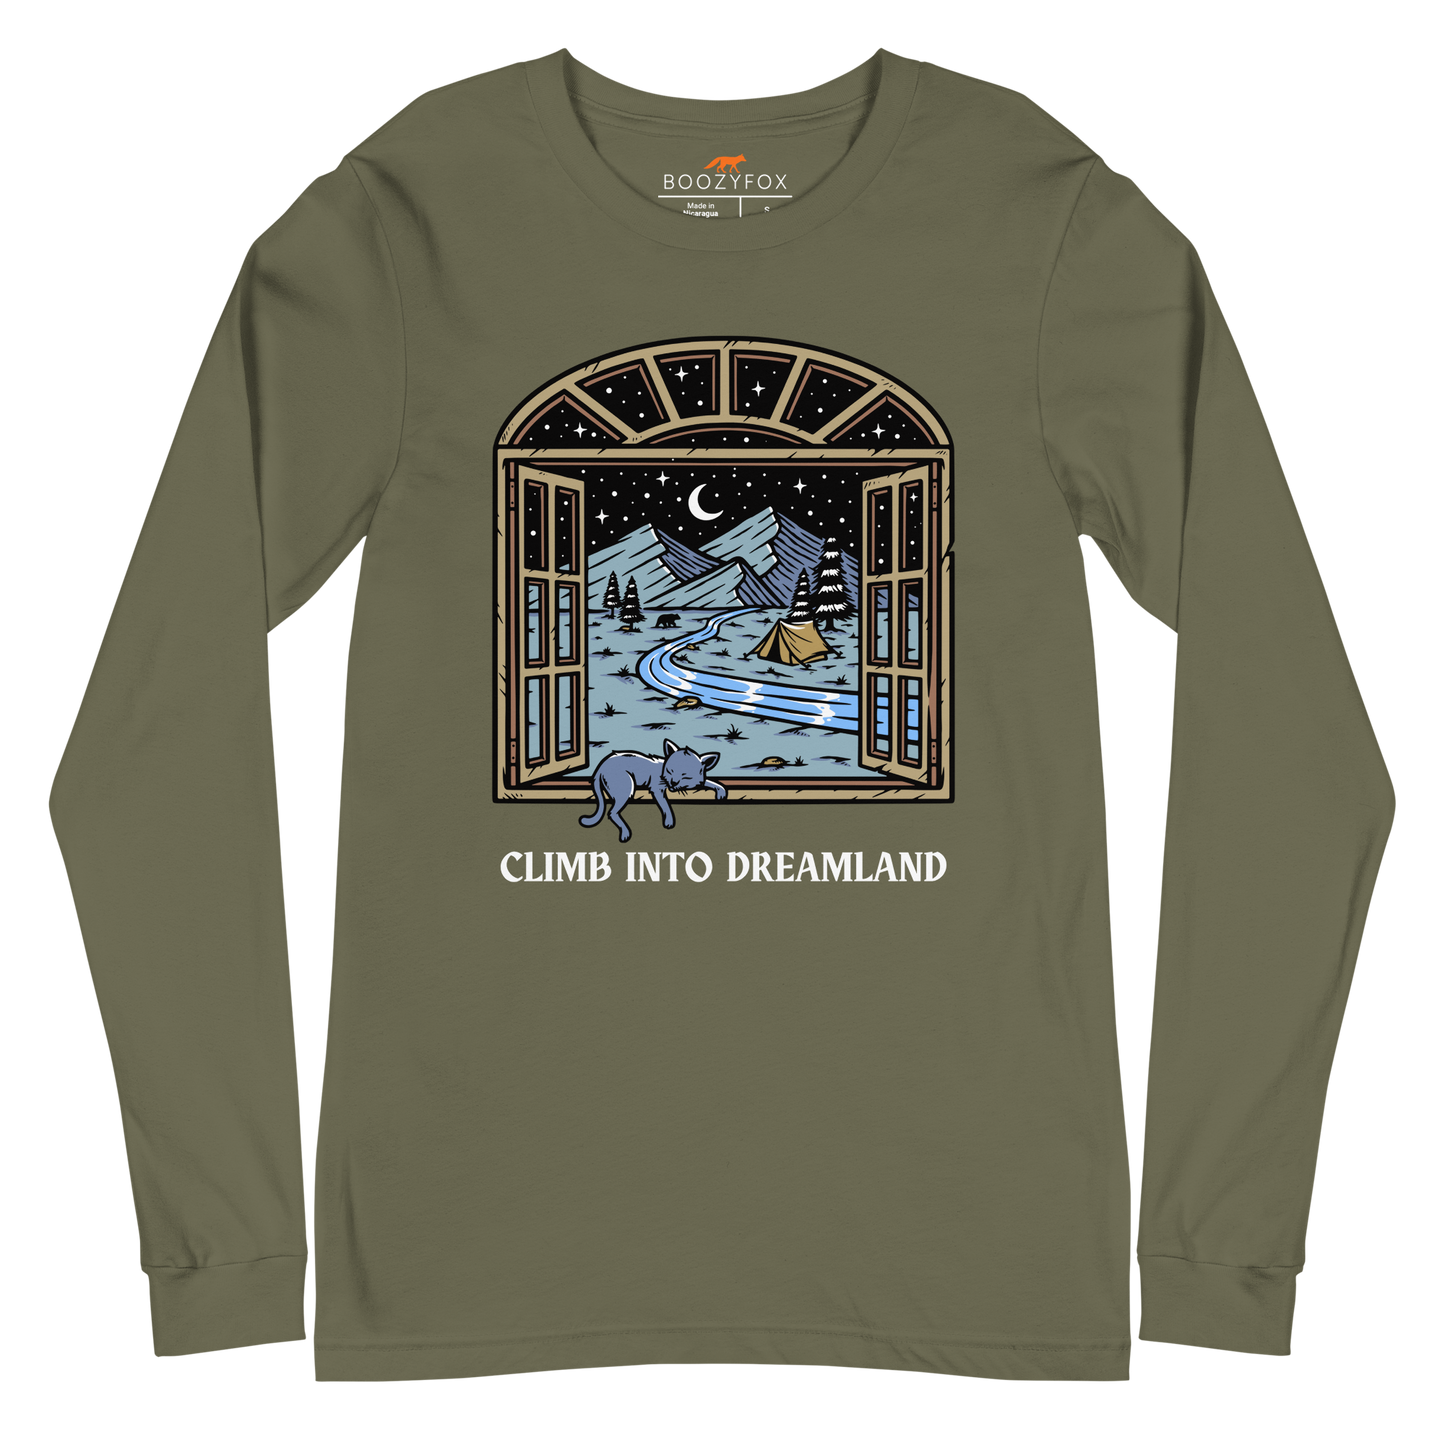 Military Green Climb Into Dreamland Long Sleeve Tee featuring a mesmerizing mountain view graphic on the chest - Cool Nature Long Sleeve Graphic Tees - Boozy Fox